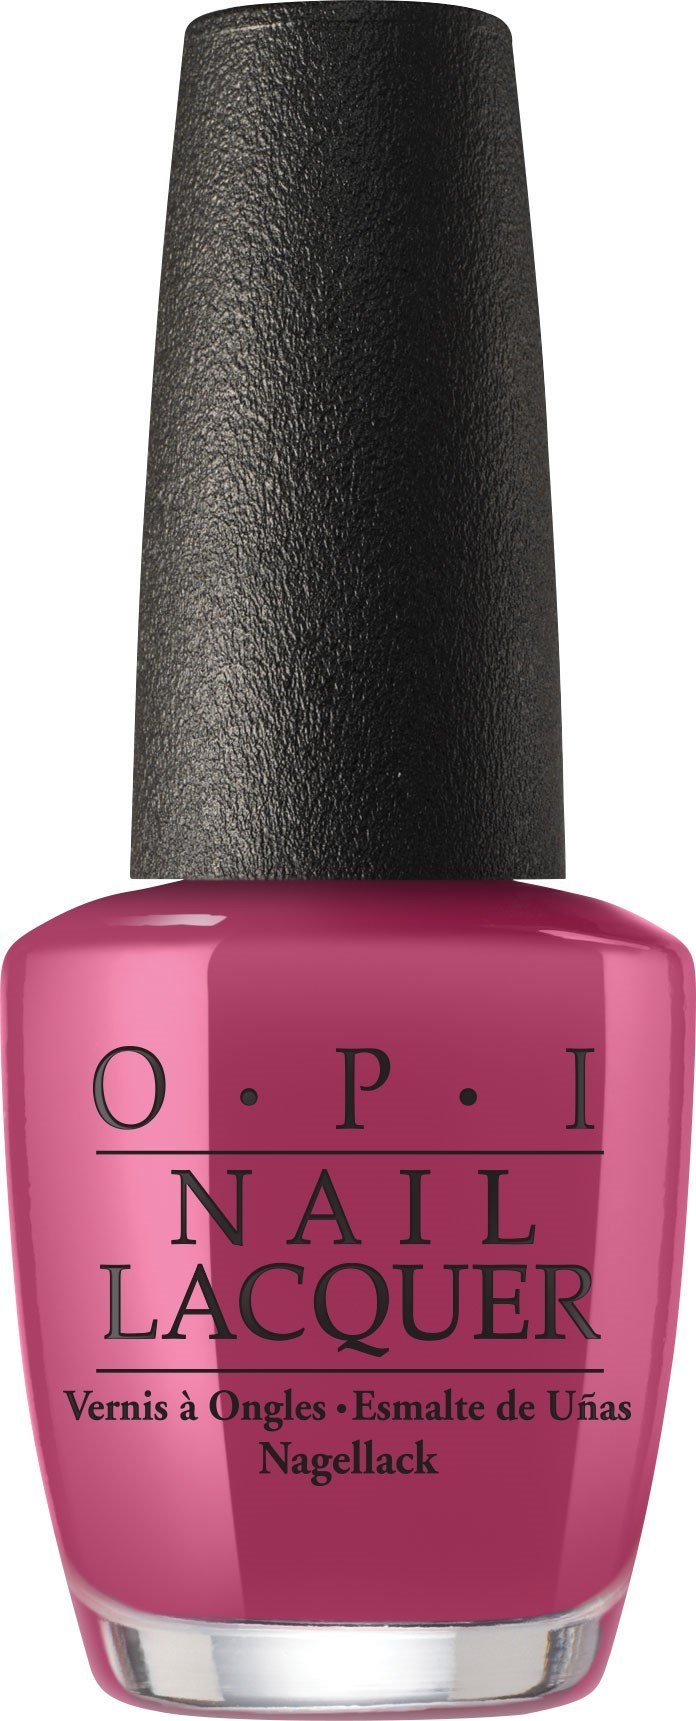 OPI Nail Lacquer - Aurora Berry-alis - ICELAND